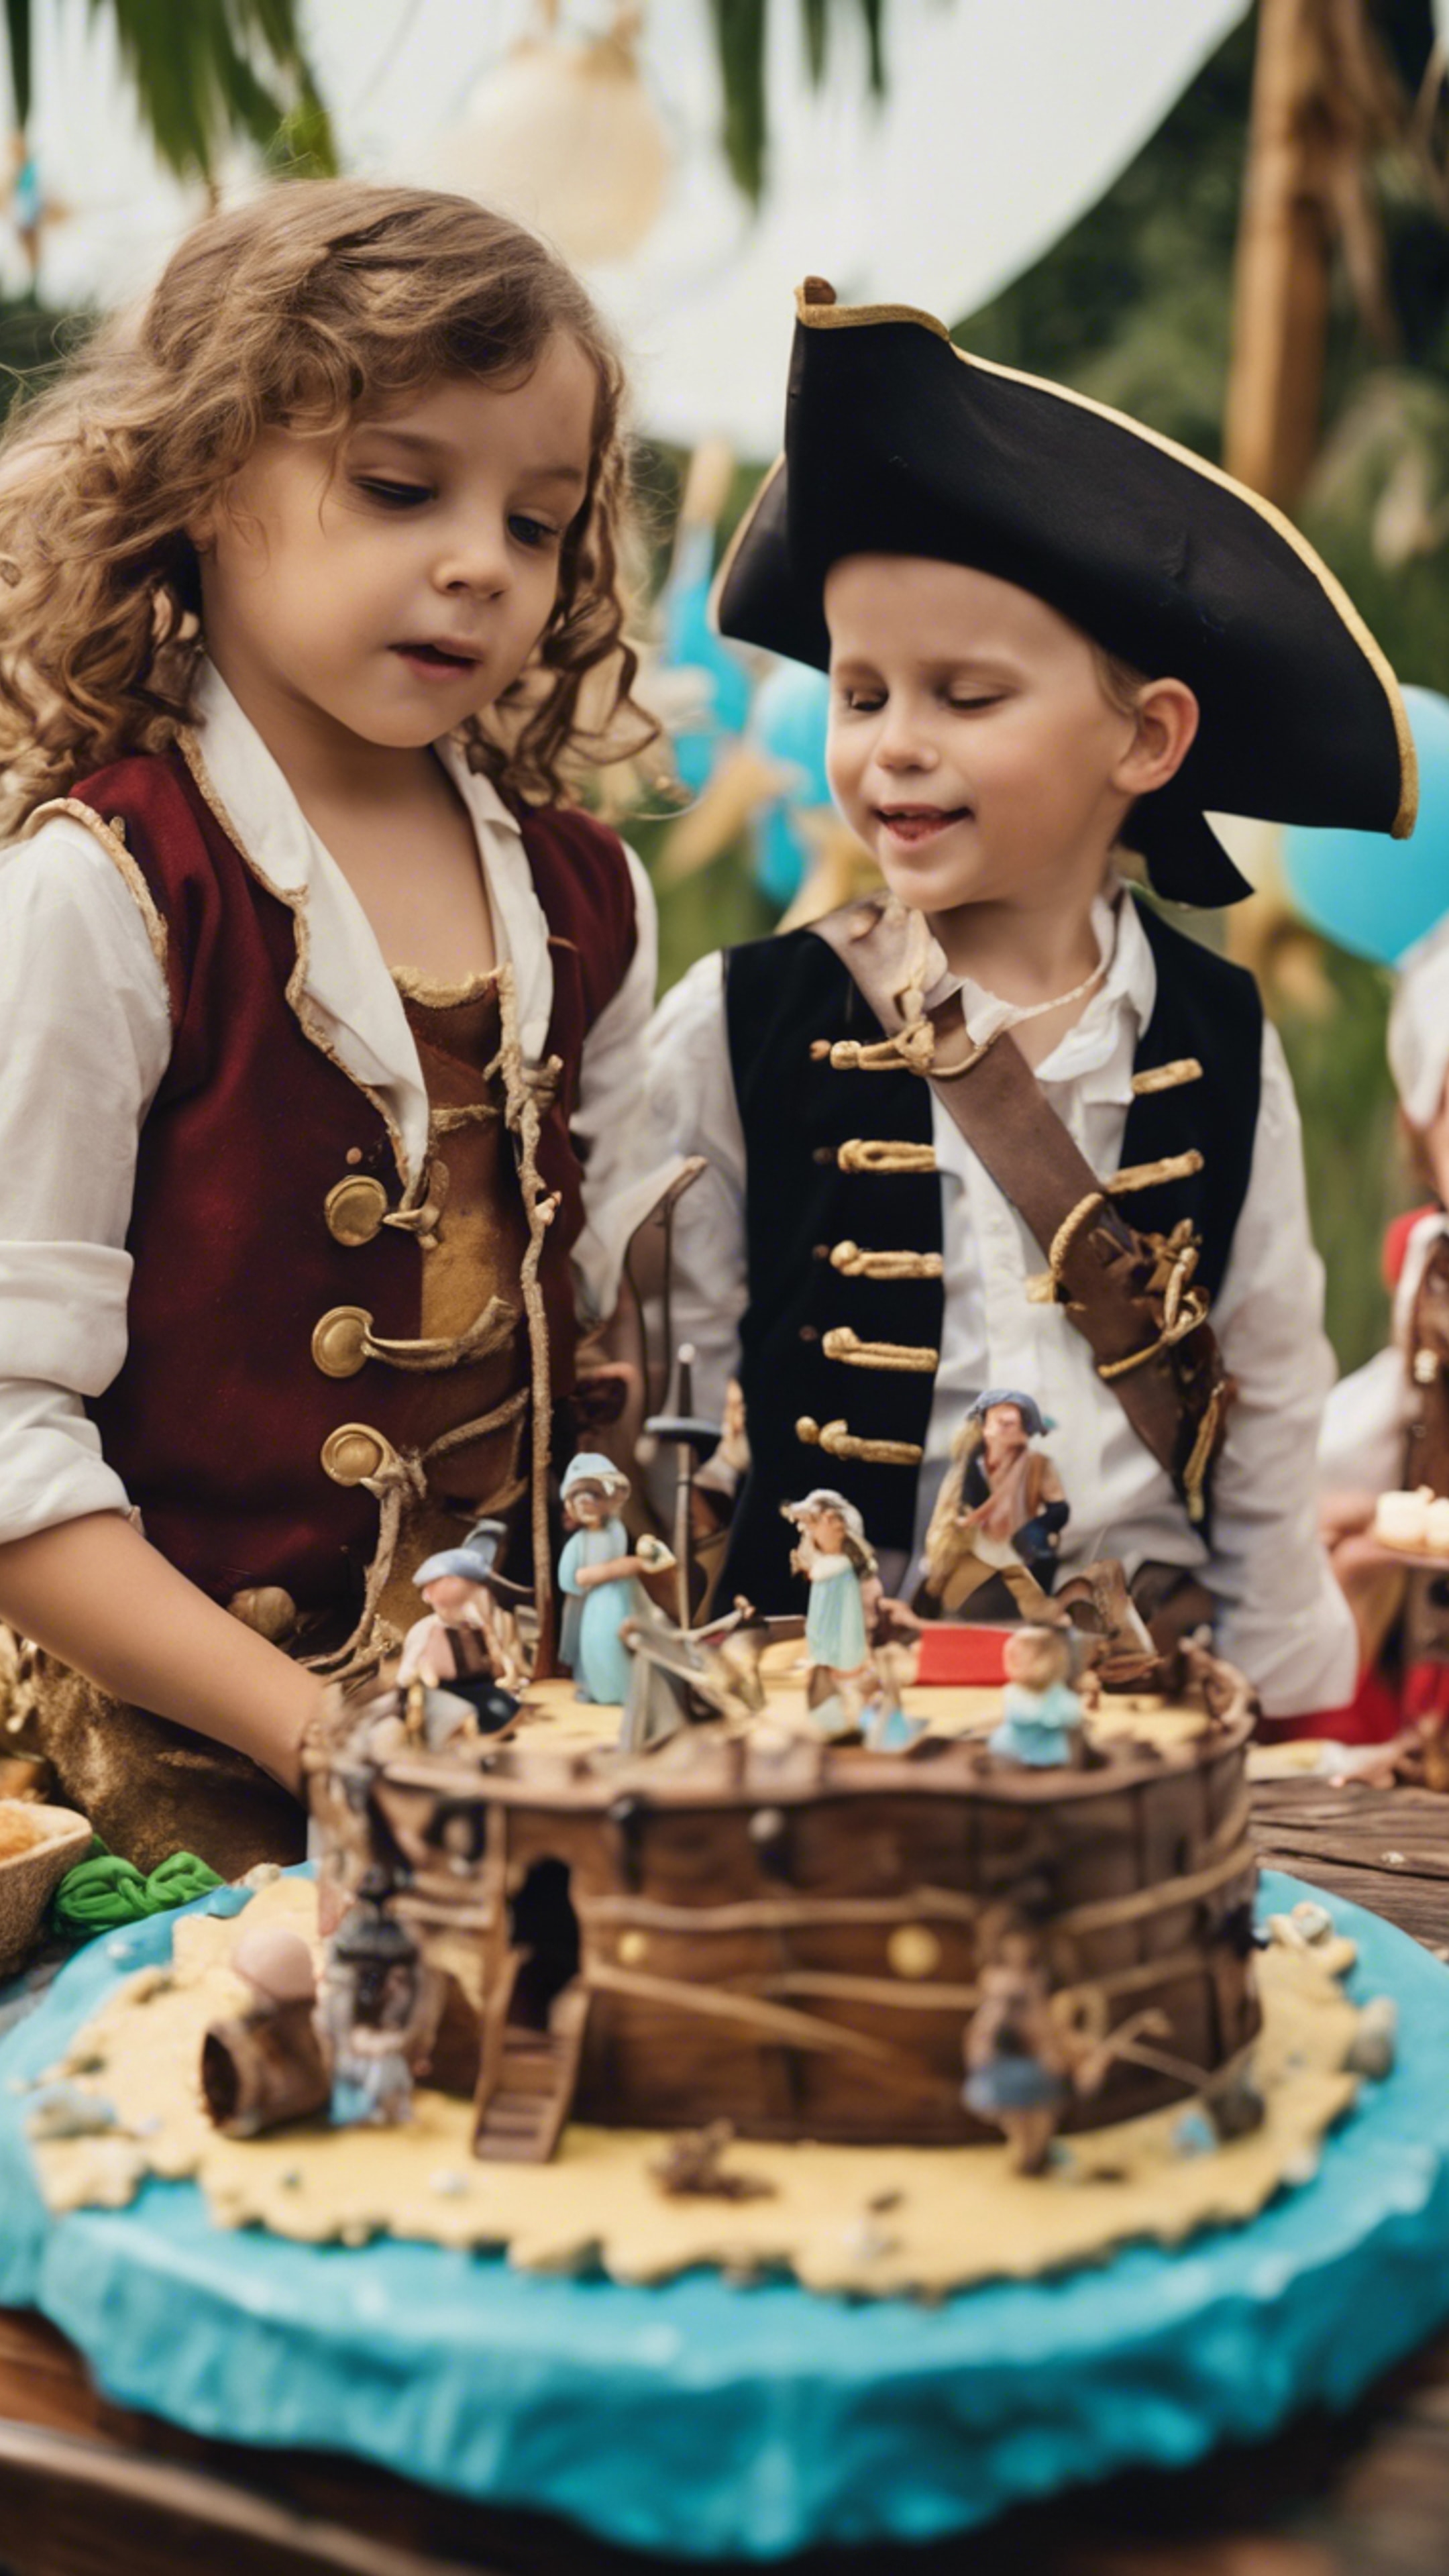 Children's pirate-themed birthday party with a treasure map, pirate ship cake and kids dressed as pirates. Tapeta[fc1a6e05b86643309d7a]